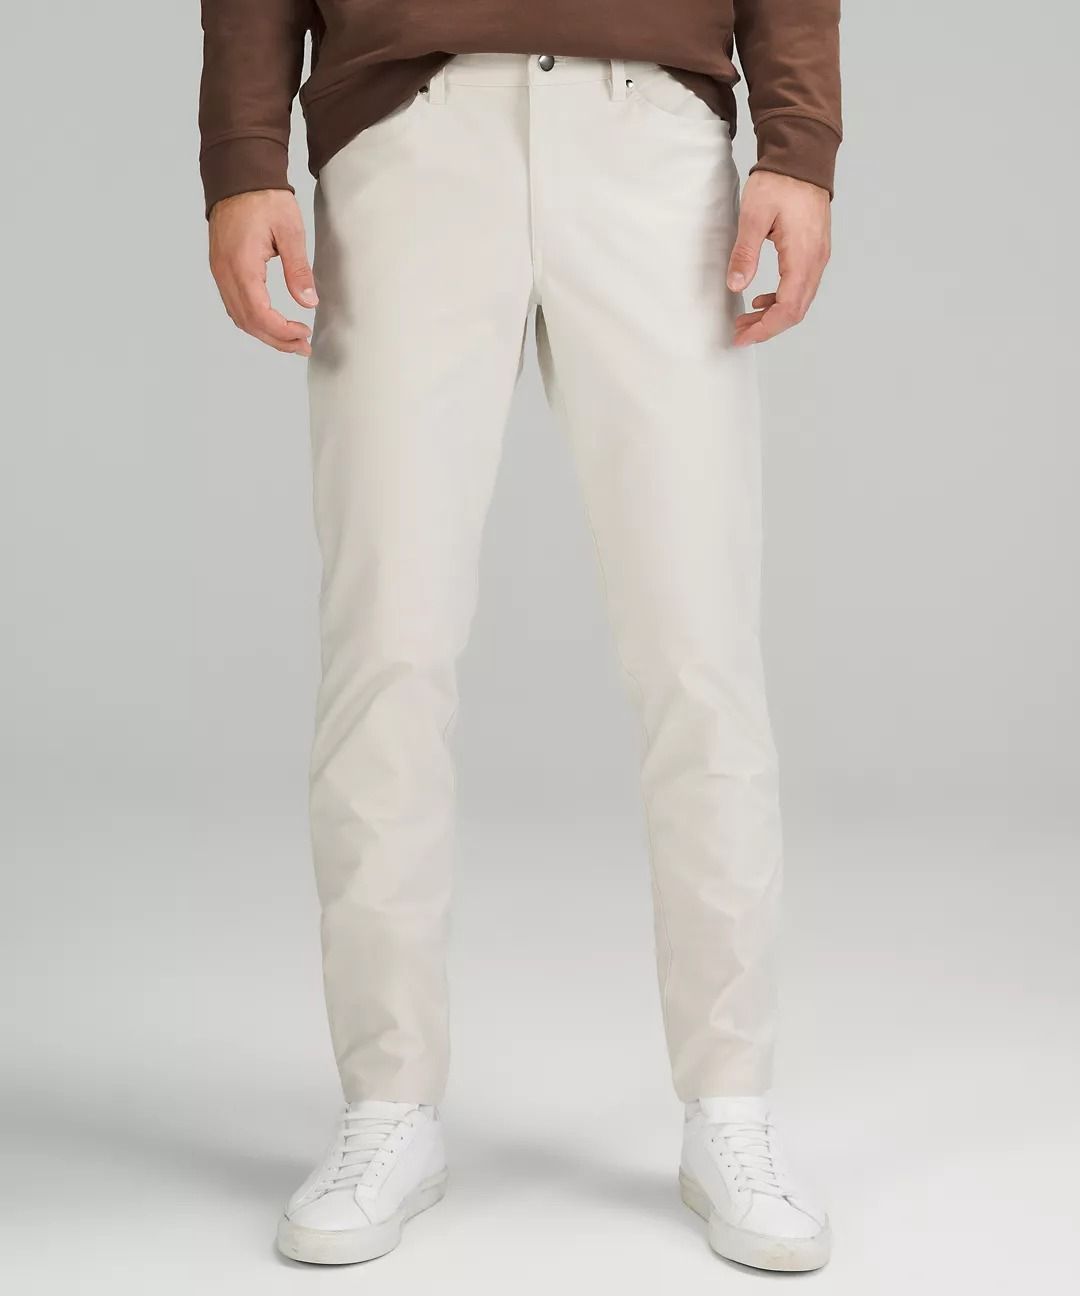 Marine Layer Saturday 5 Pocket Twill Pant - Thyme | Casual Pants | Huckberry